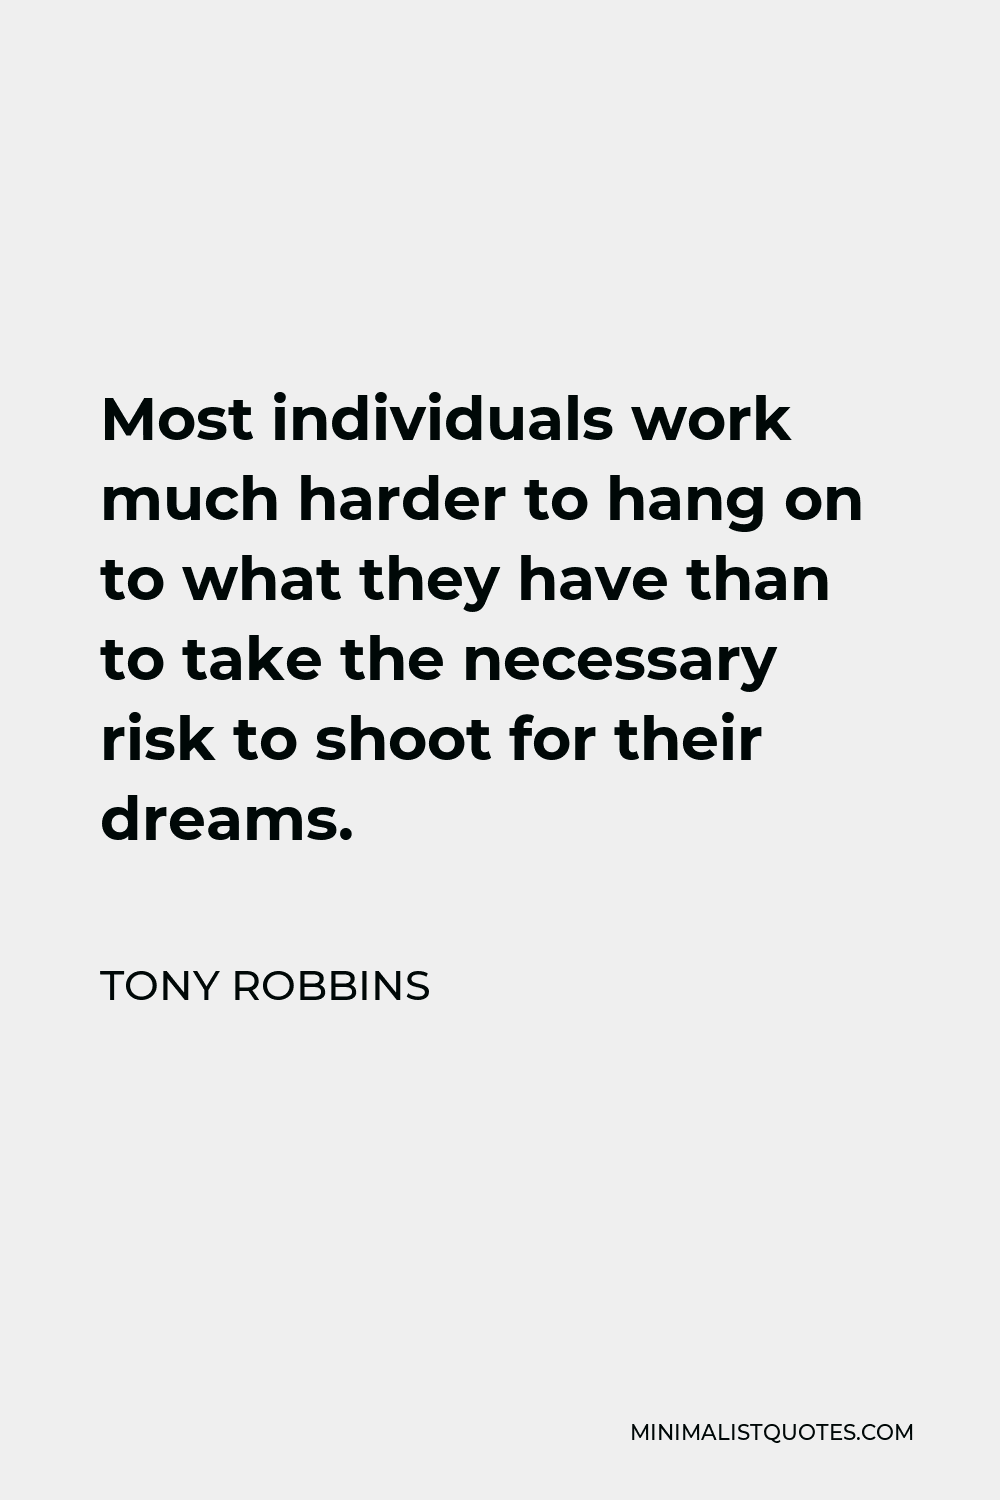 Tony Robbins Quote - Most individuals work much harder to hang on to what they have than to take the necessary risk to shoot for their dreams.